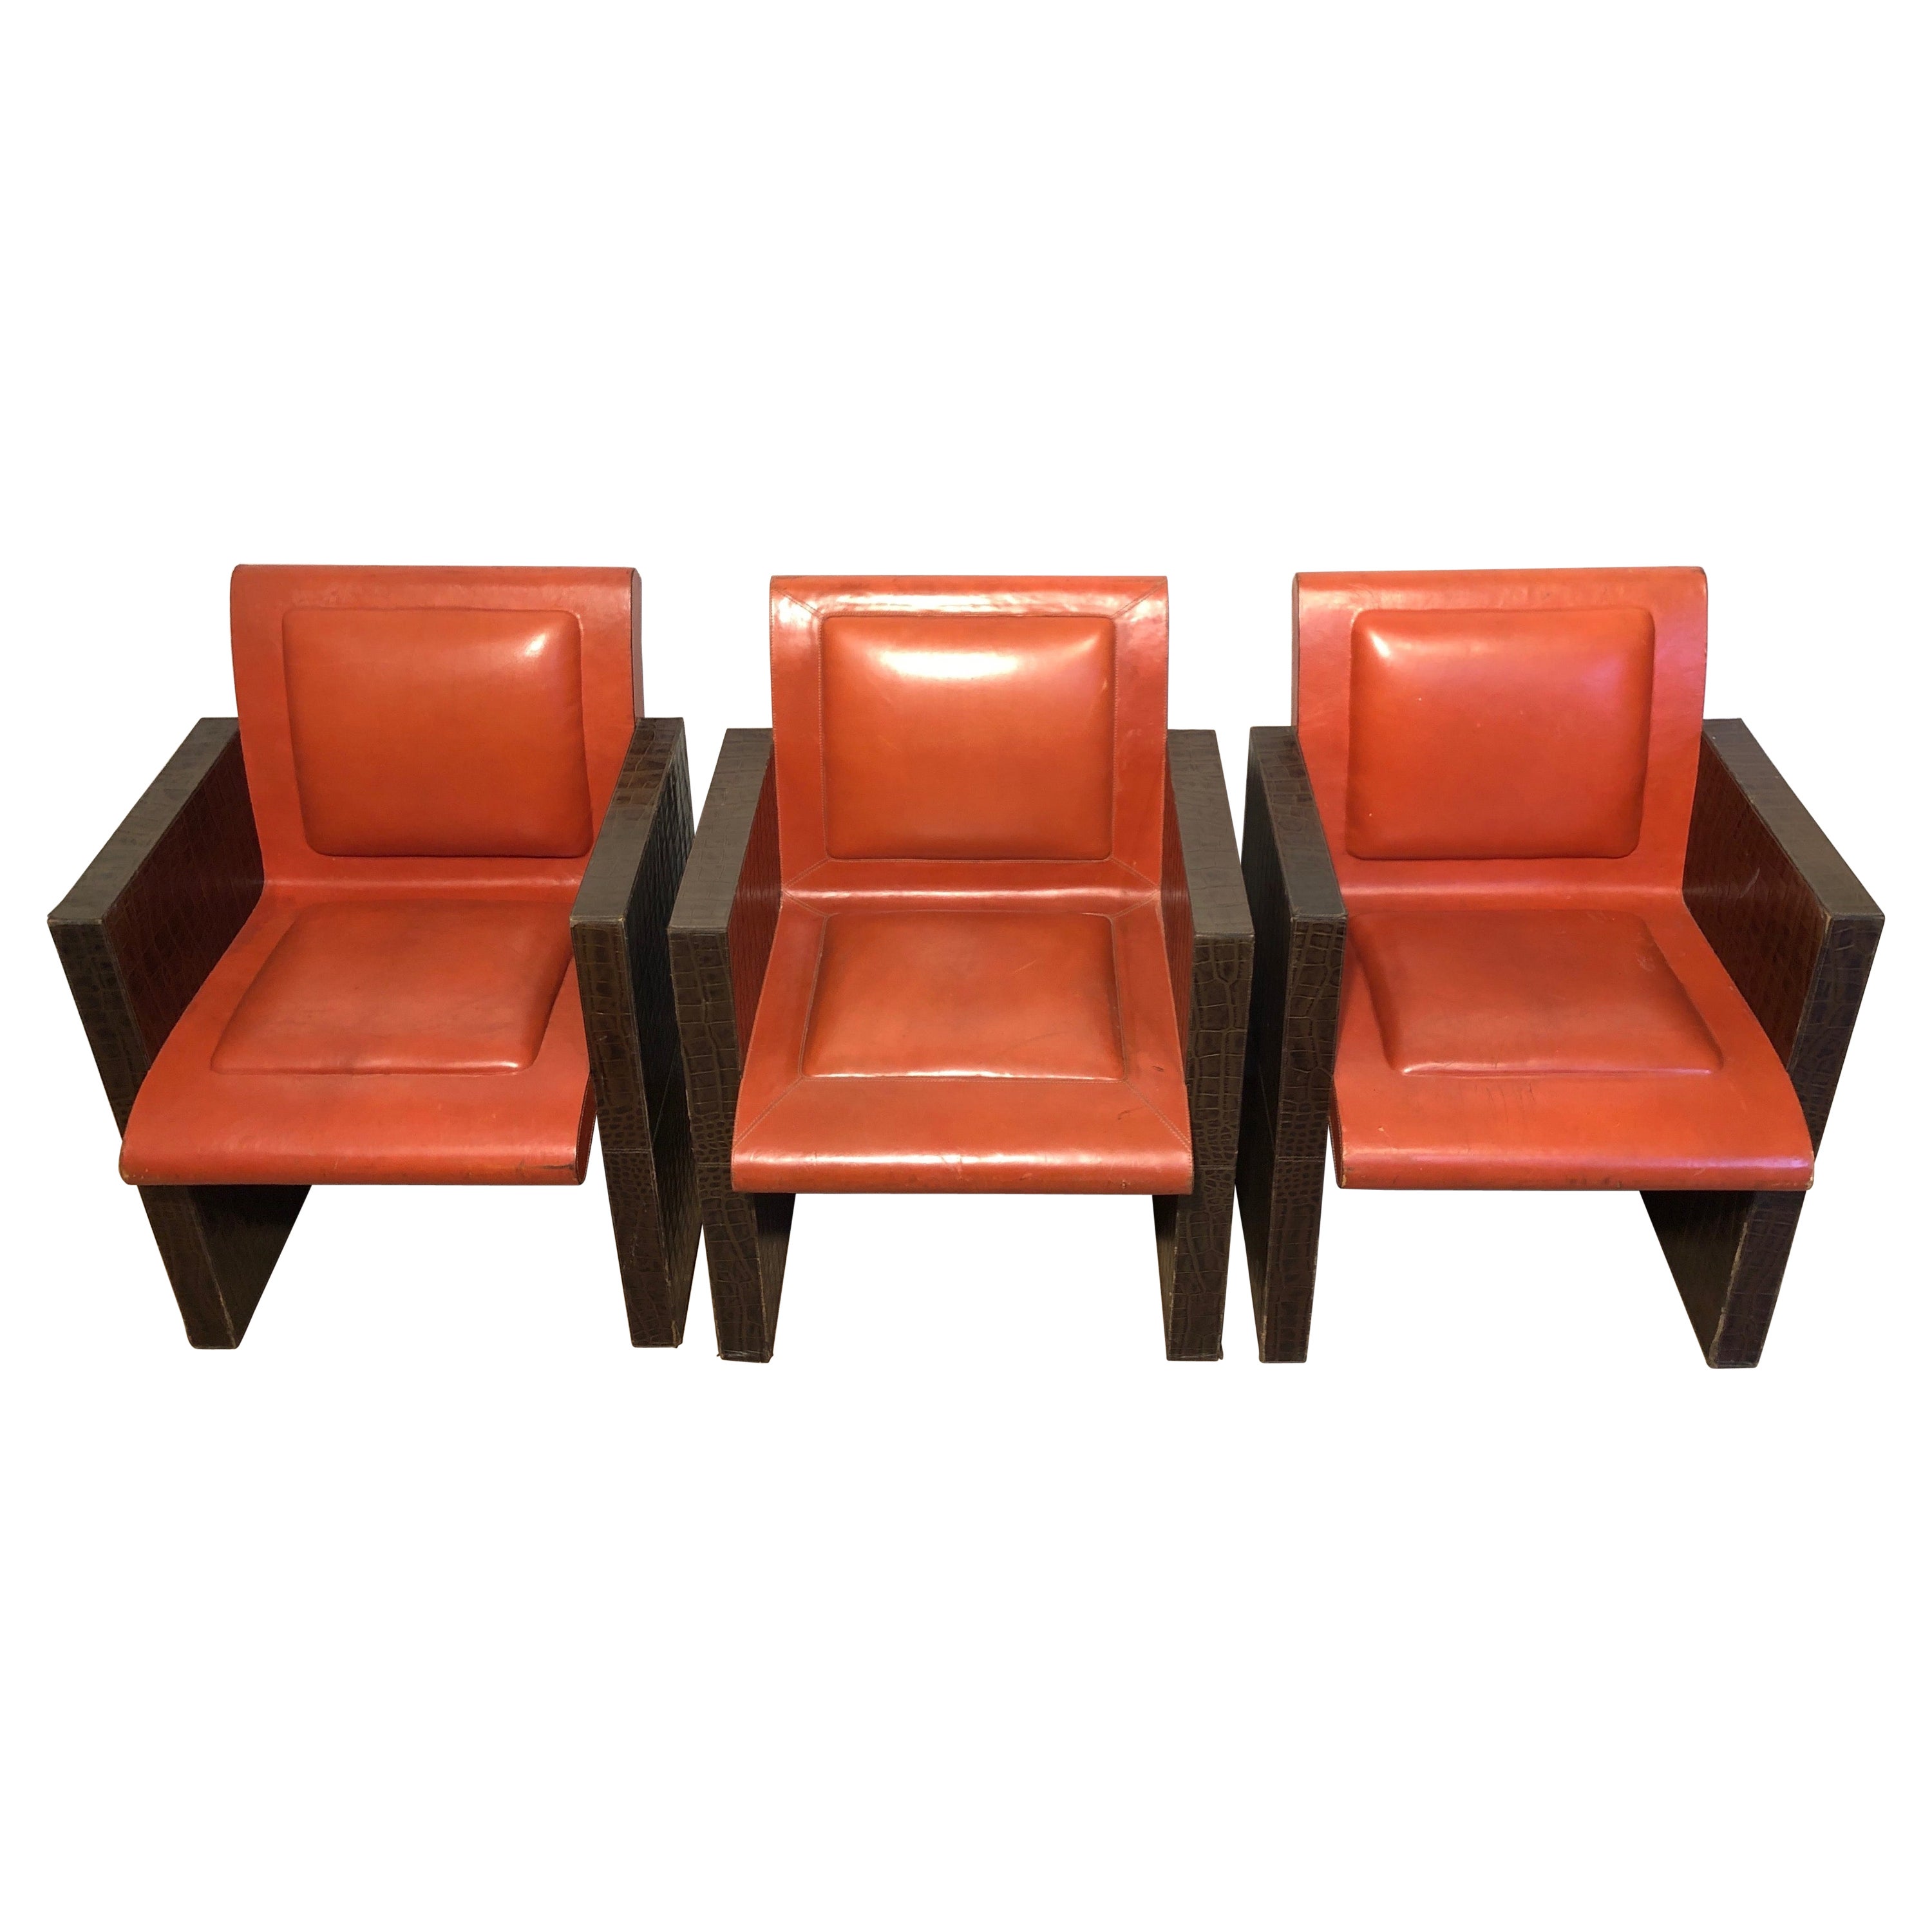 Pair of orangeish and brown leather armchairs (Can be sold individually). French For Sale